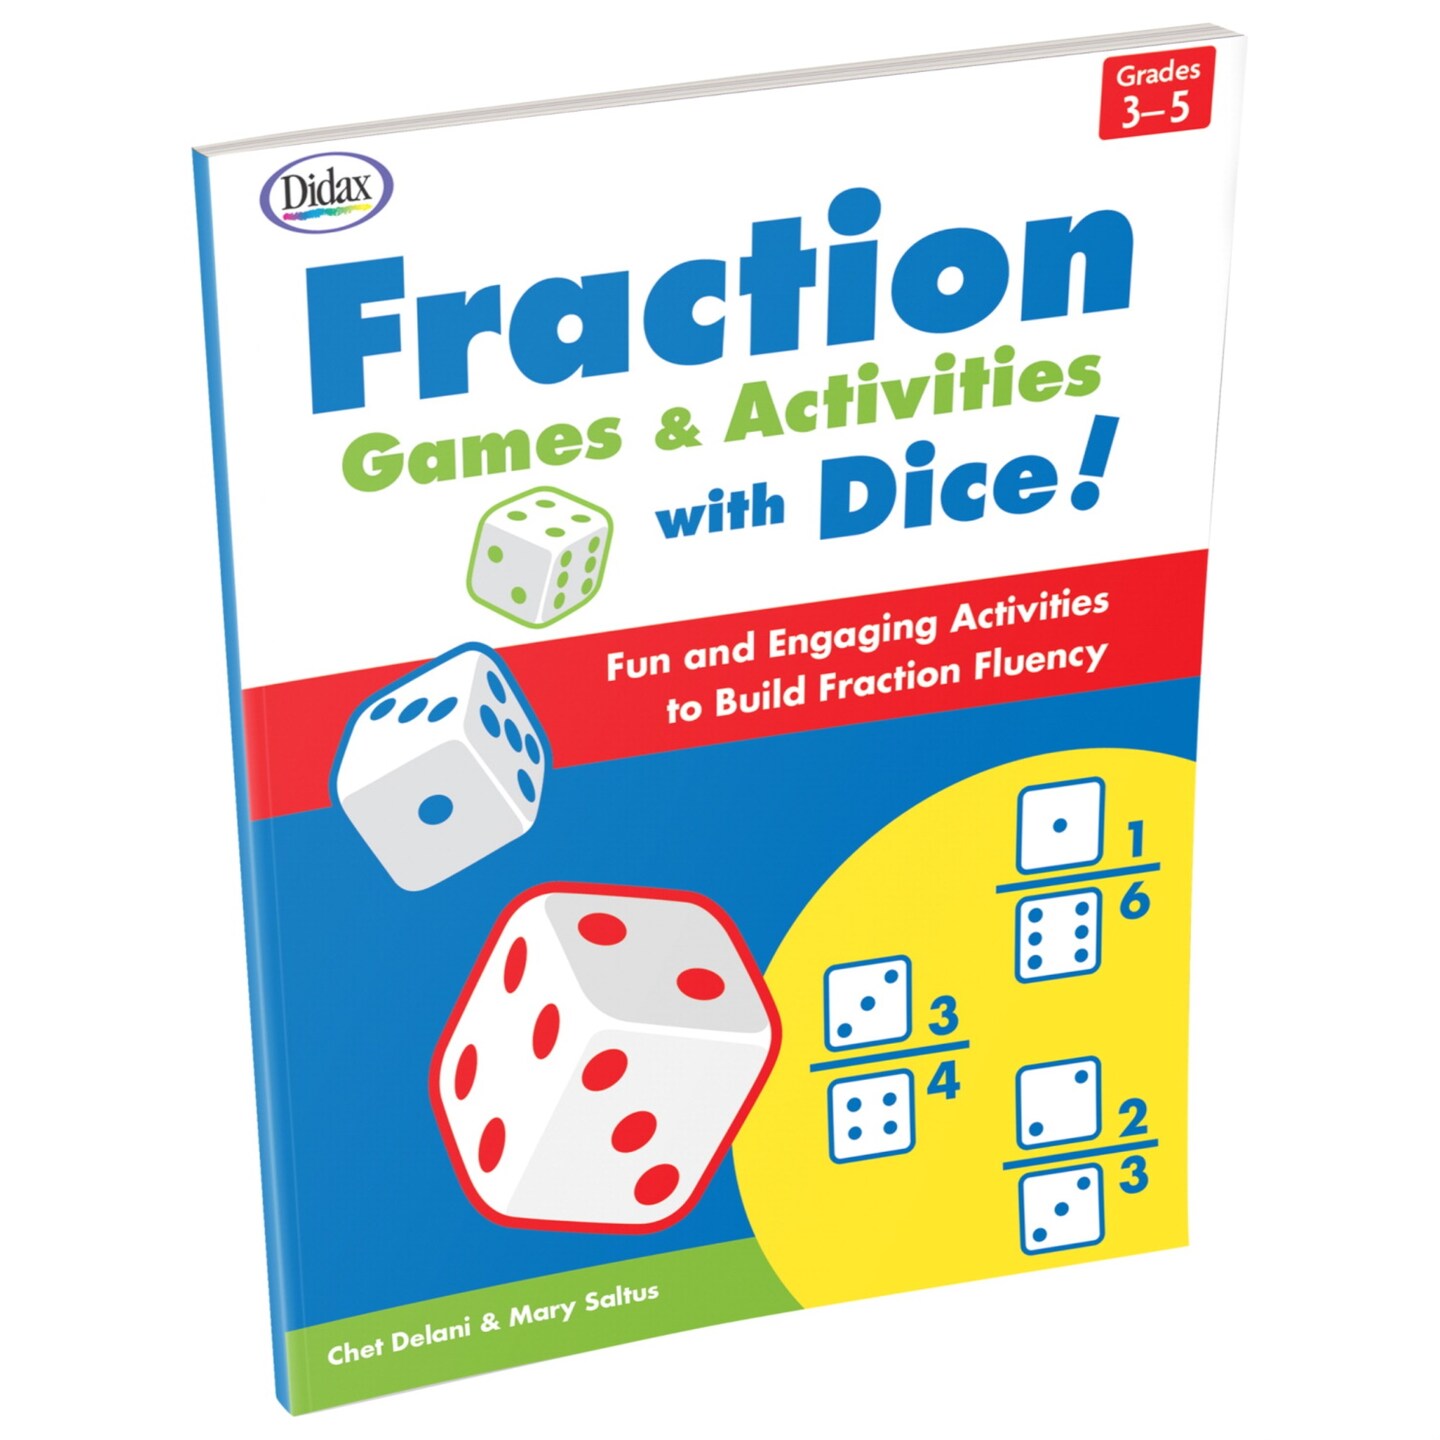 didax-fraction-games-activities-with-dice-grades-3-to-5-active